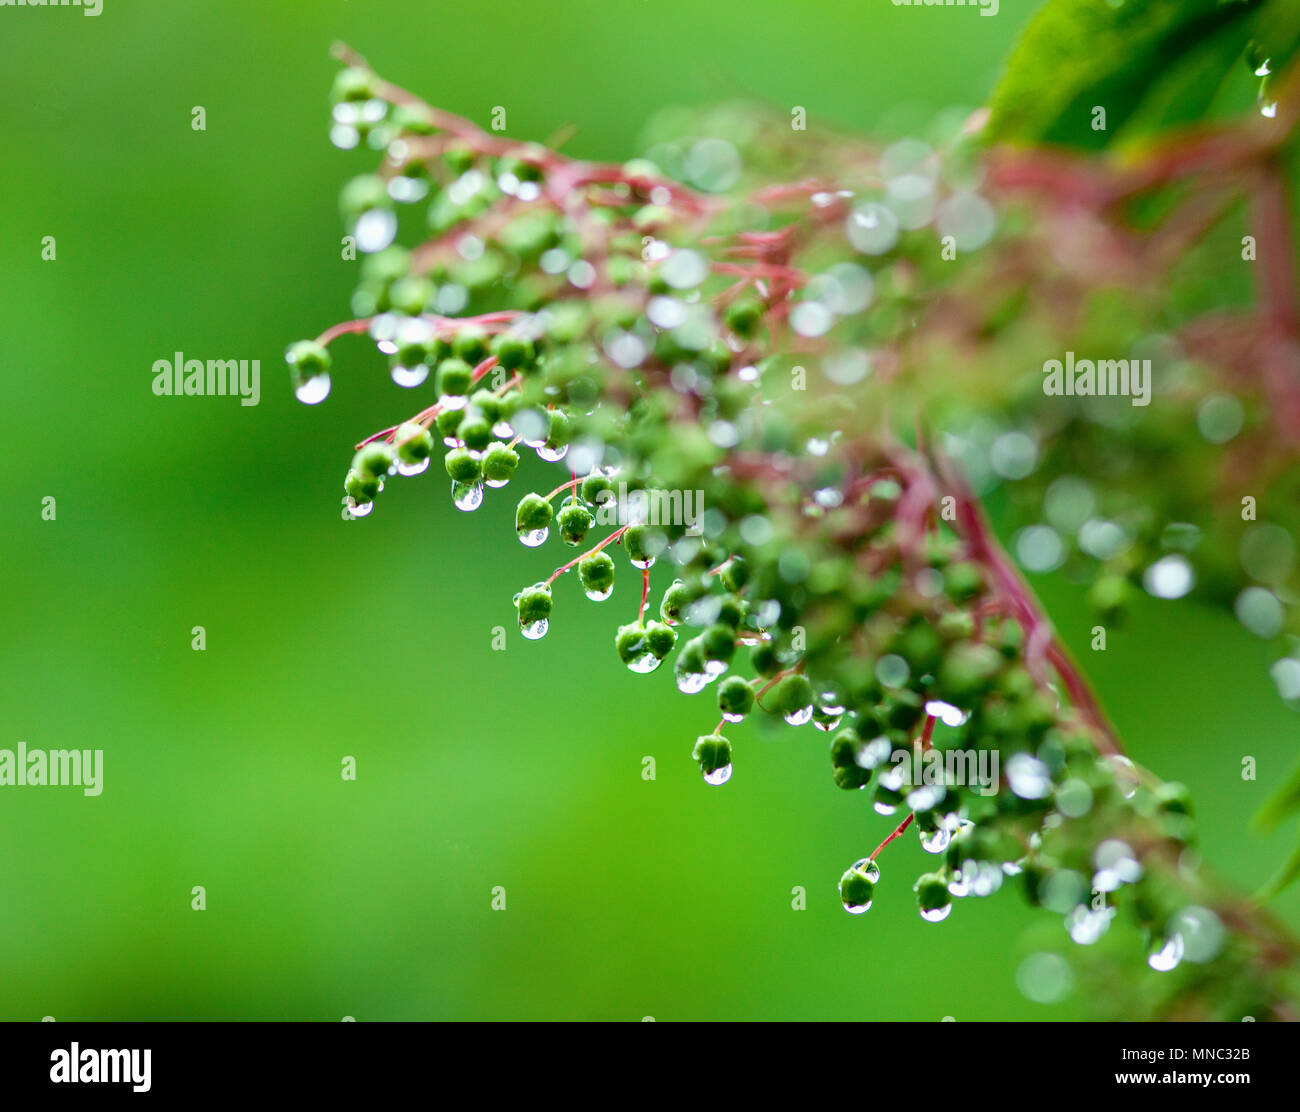 Droplets of Water on Plant after Rain in the Garden Stock Photo